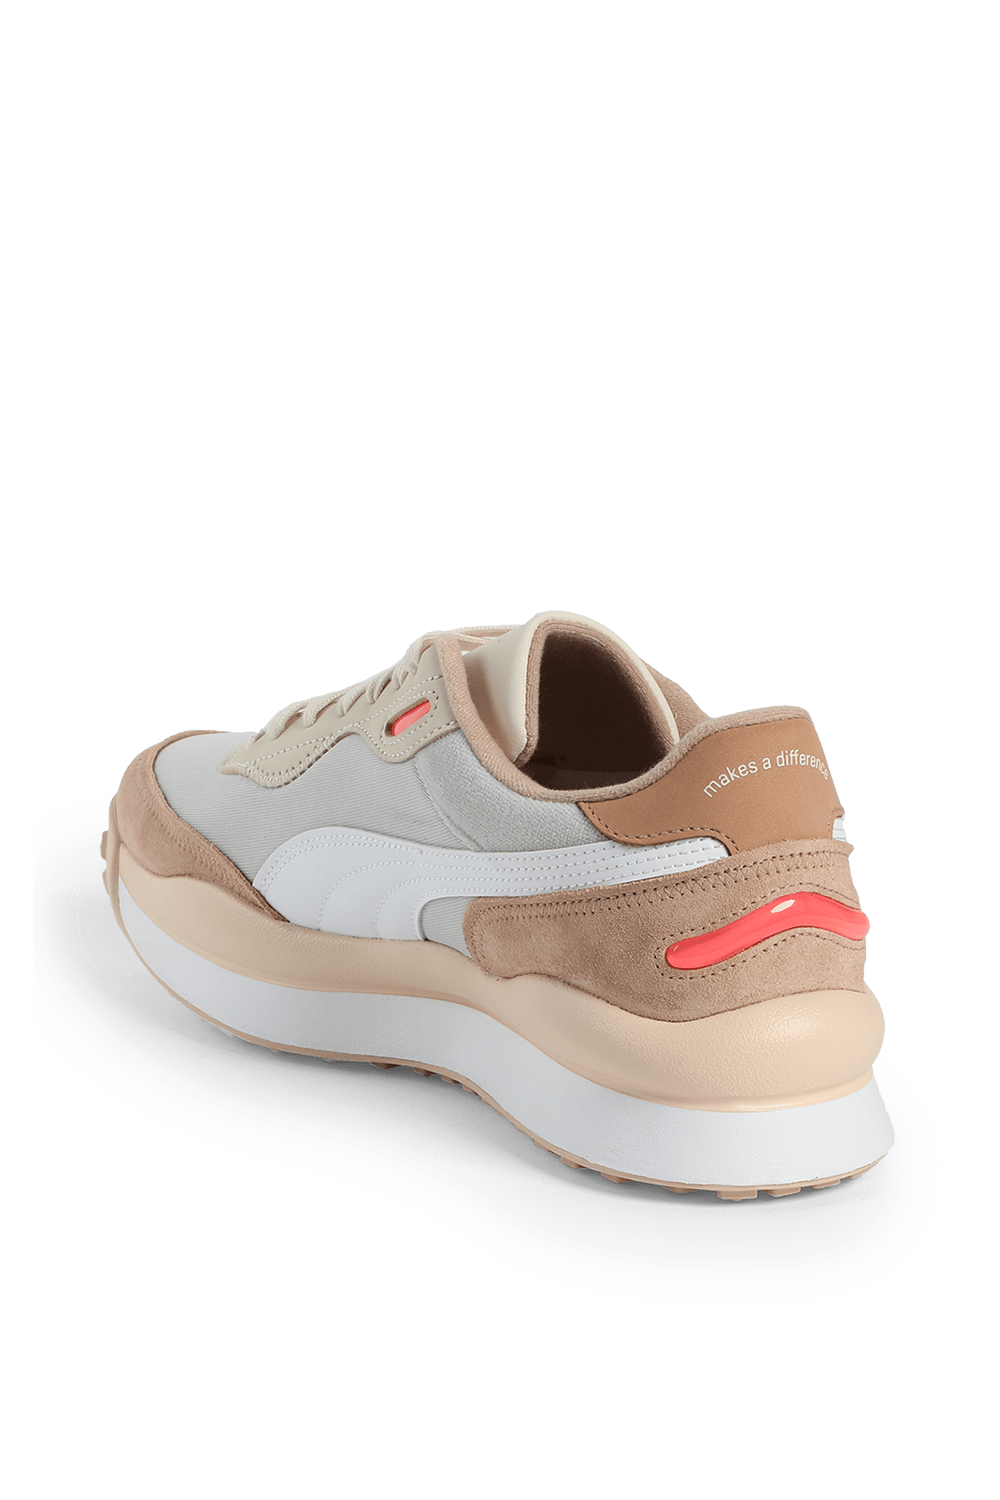 Style Rider in Grey and Brown PUMA